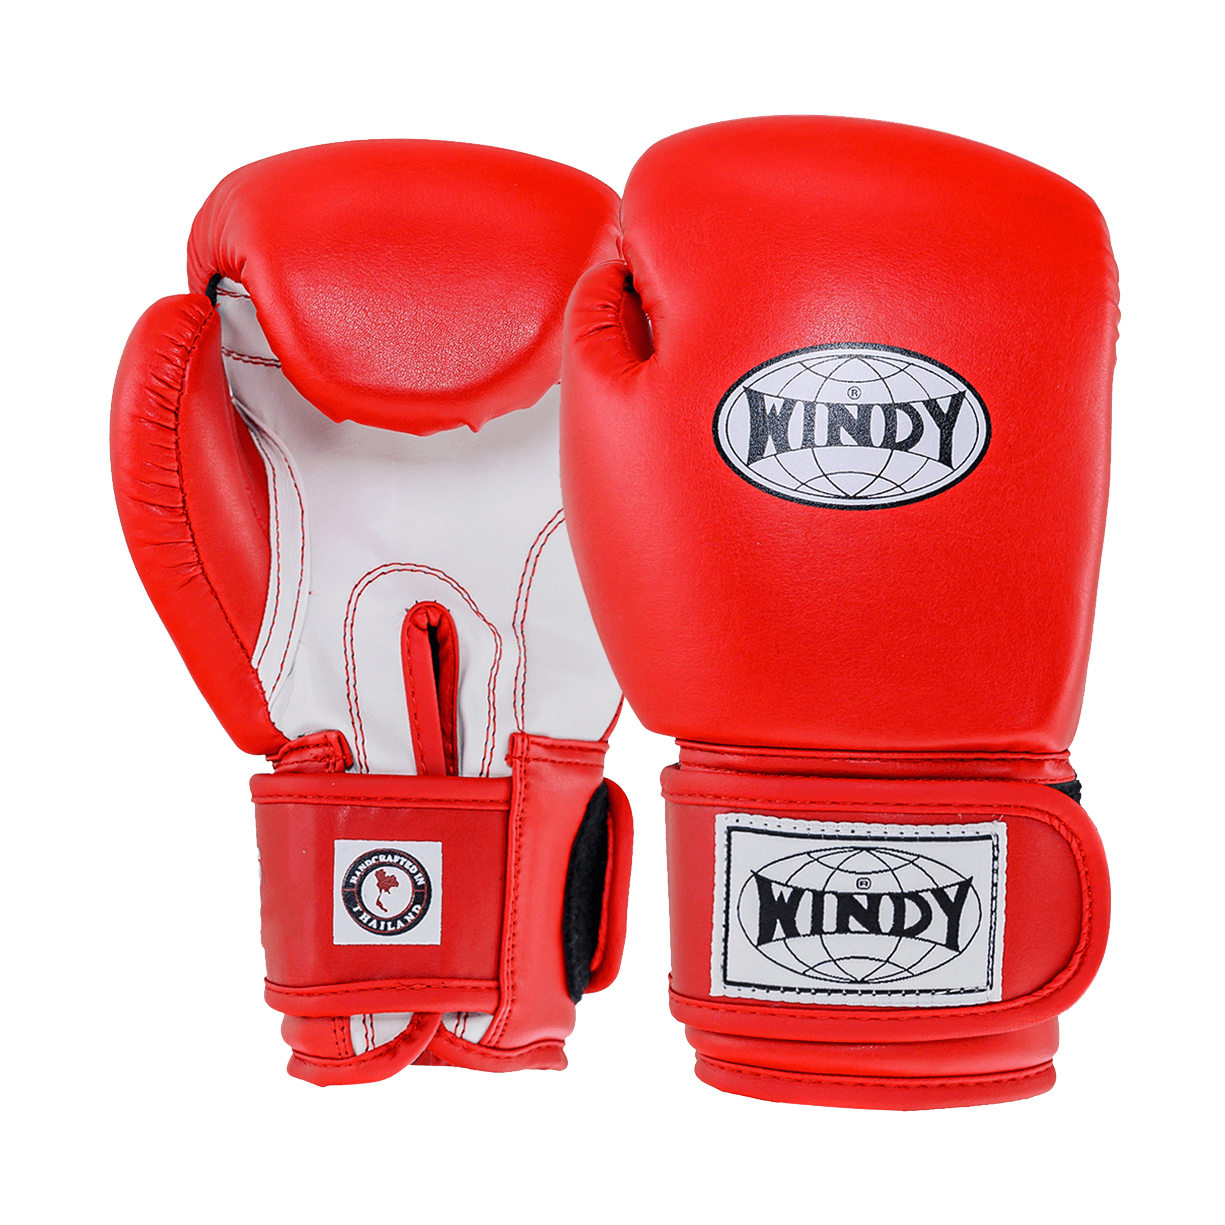 Kids Boxing Gloves - Red - Windy Fight Gear